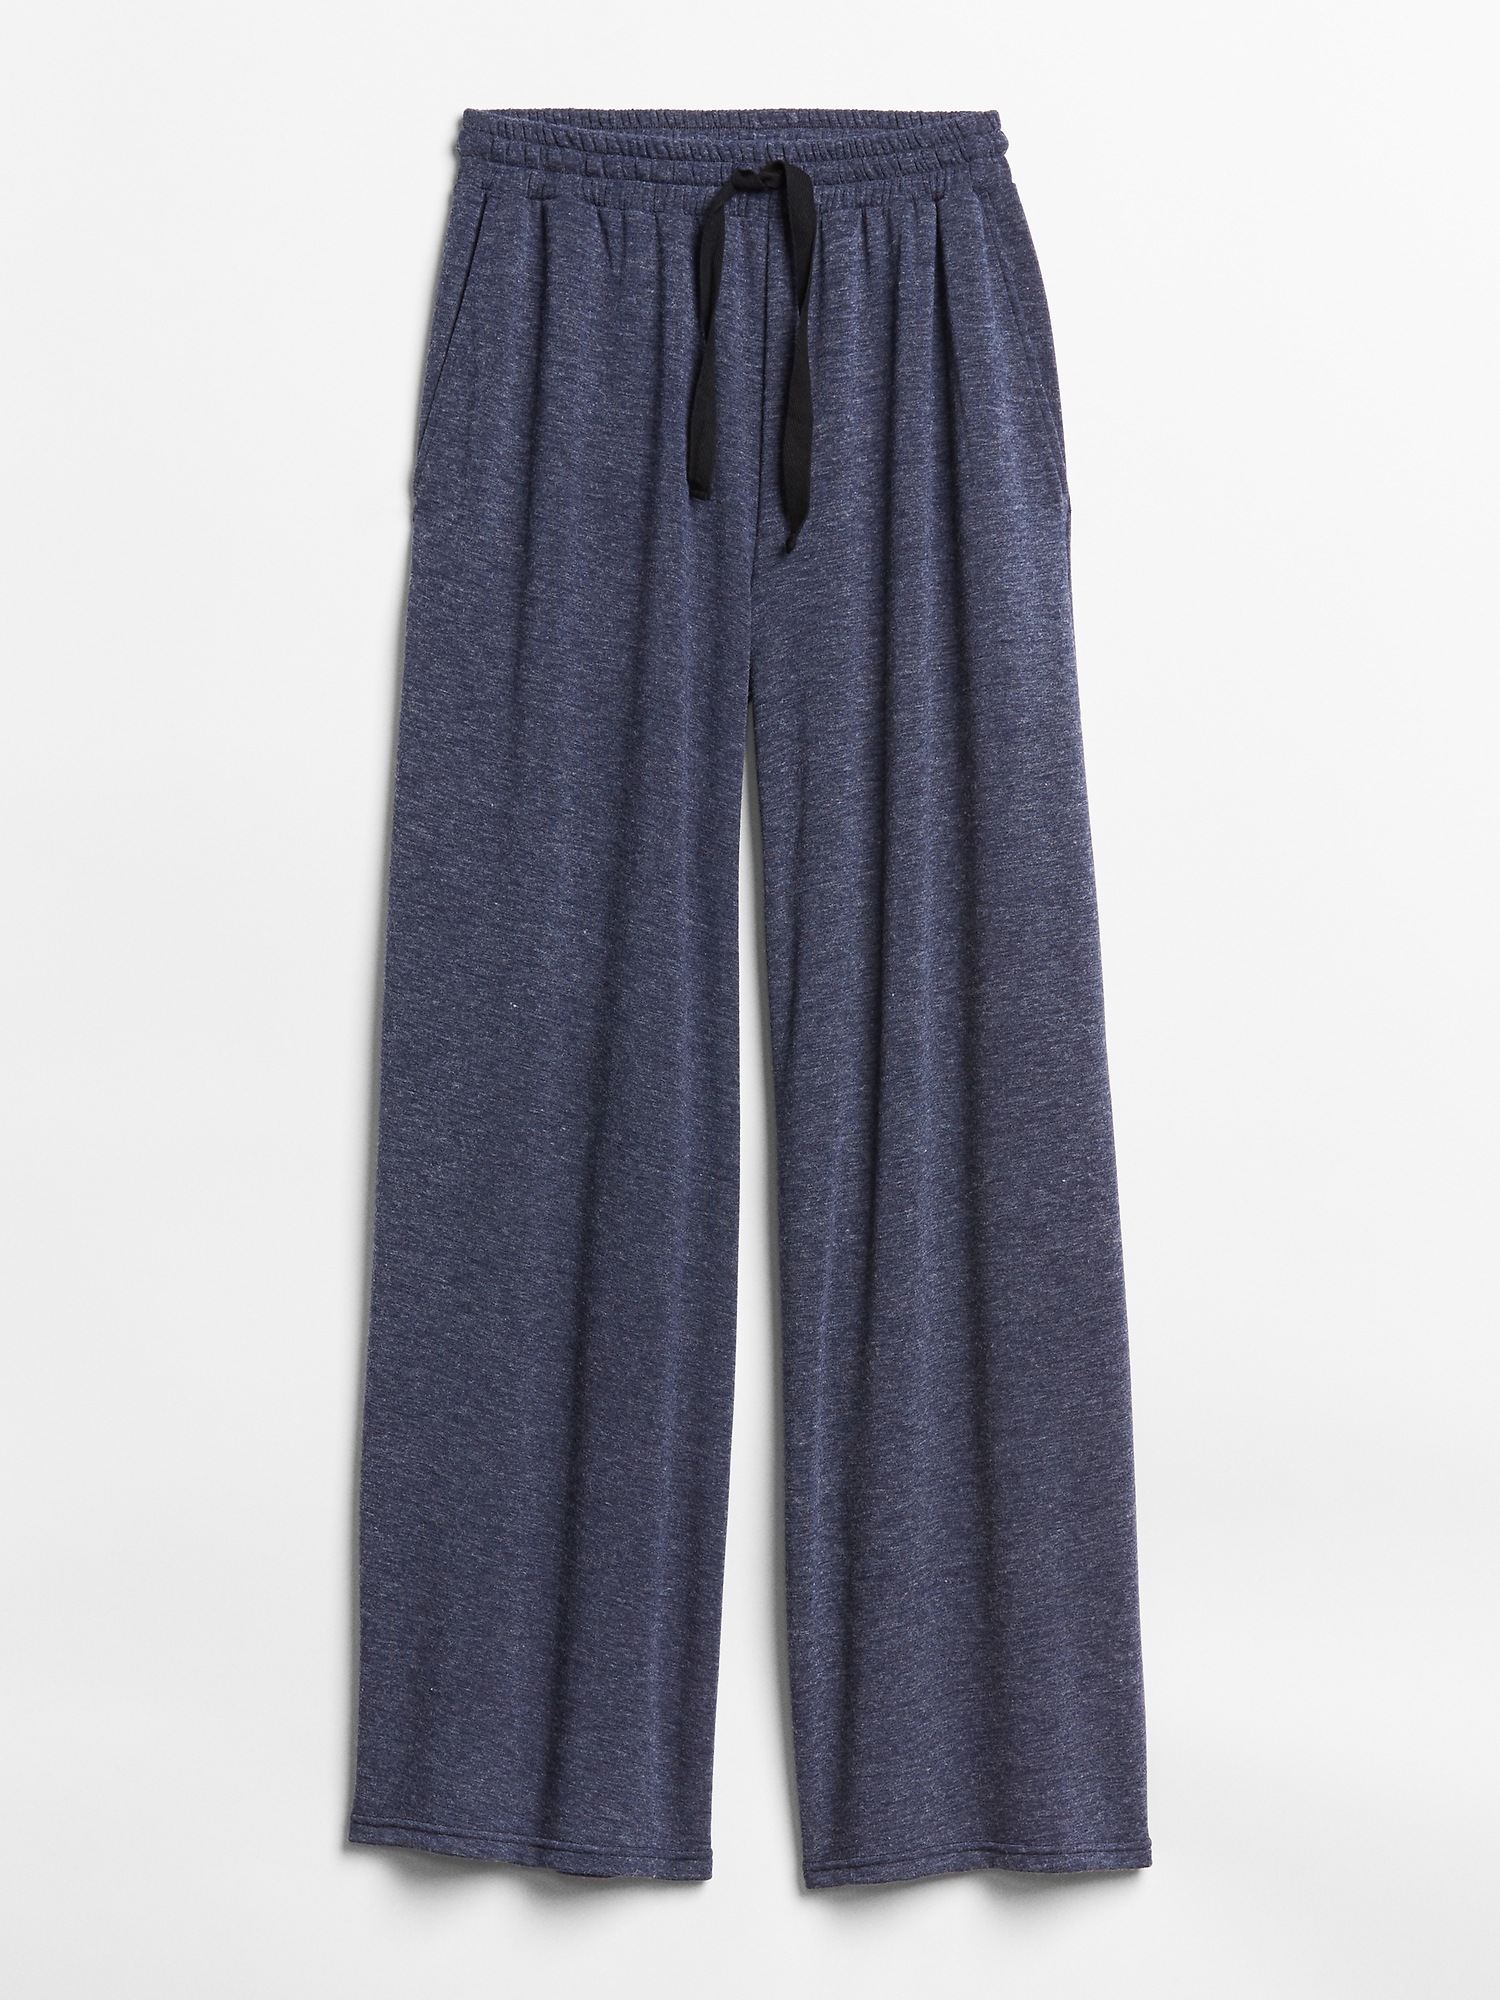 Women's Wide Leg Drawstring Lounge Pants • Size: S/M (Sizes 2-8) •  Approximately 41 in Length • 29 Inseam • 100% Polyester • Drawstring  high-rise waistband • Two pockets for keeping your